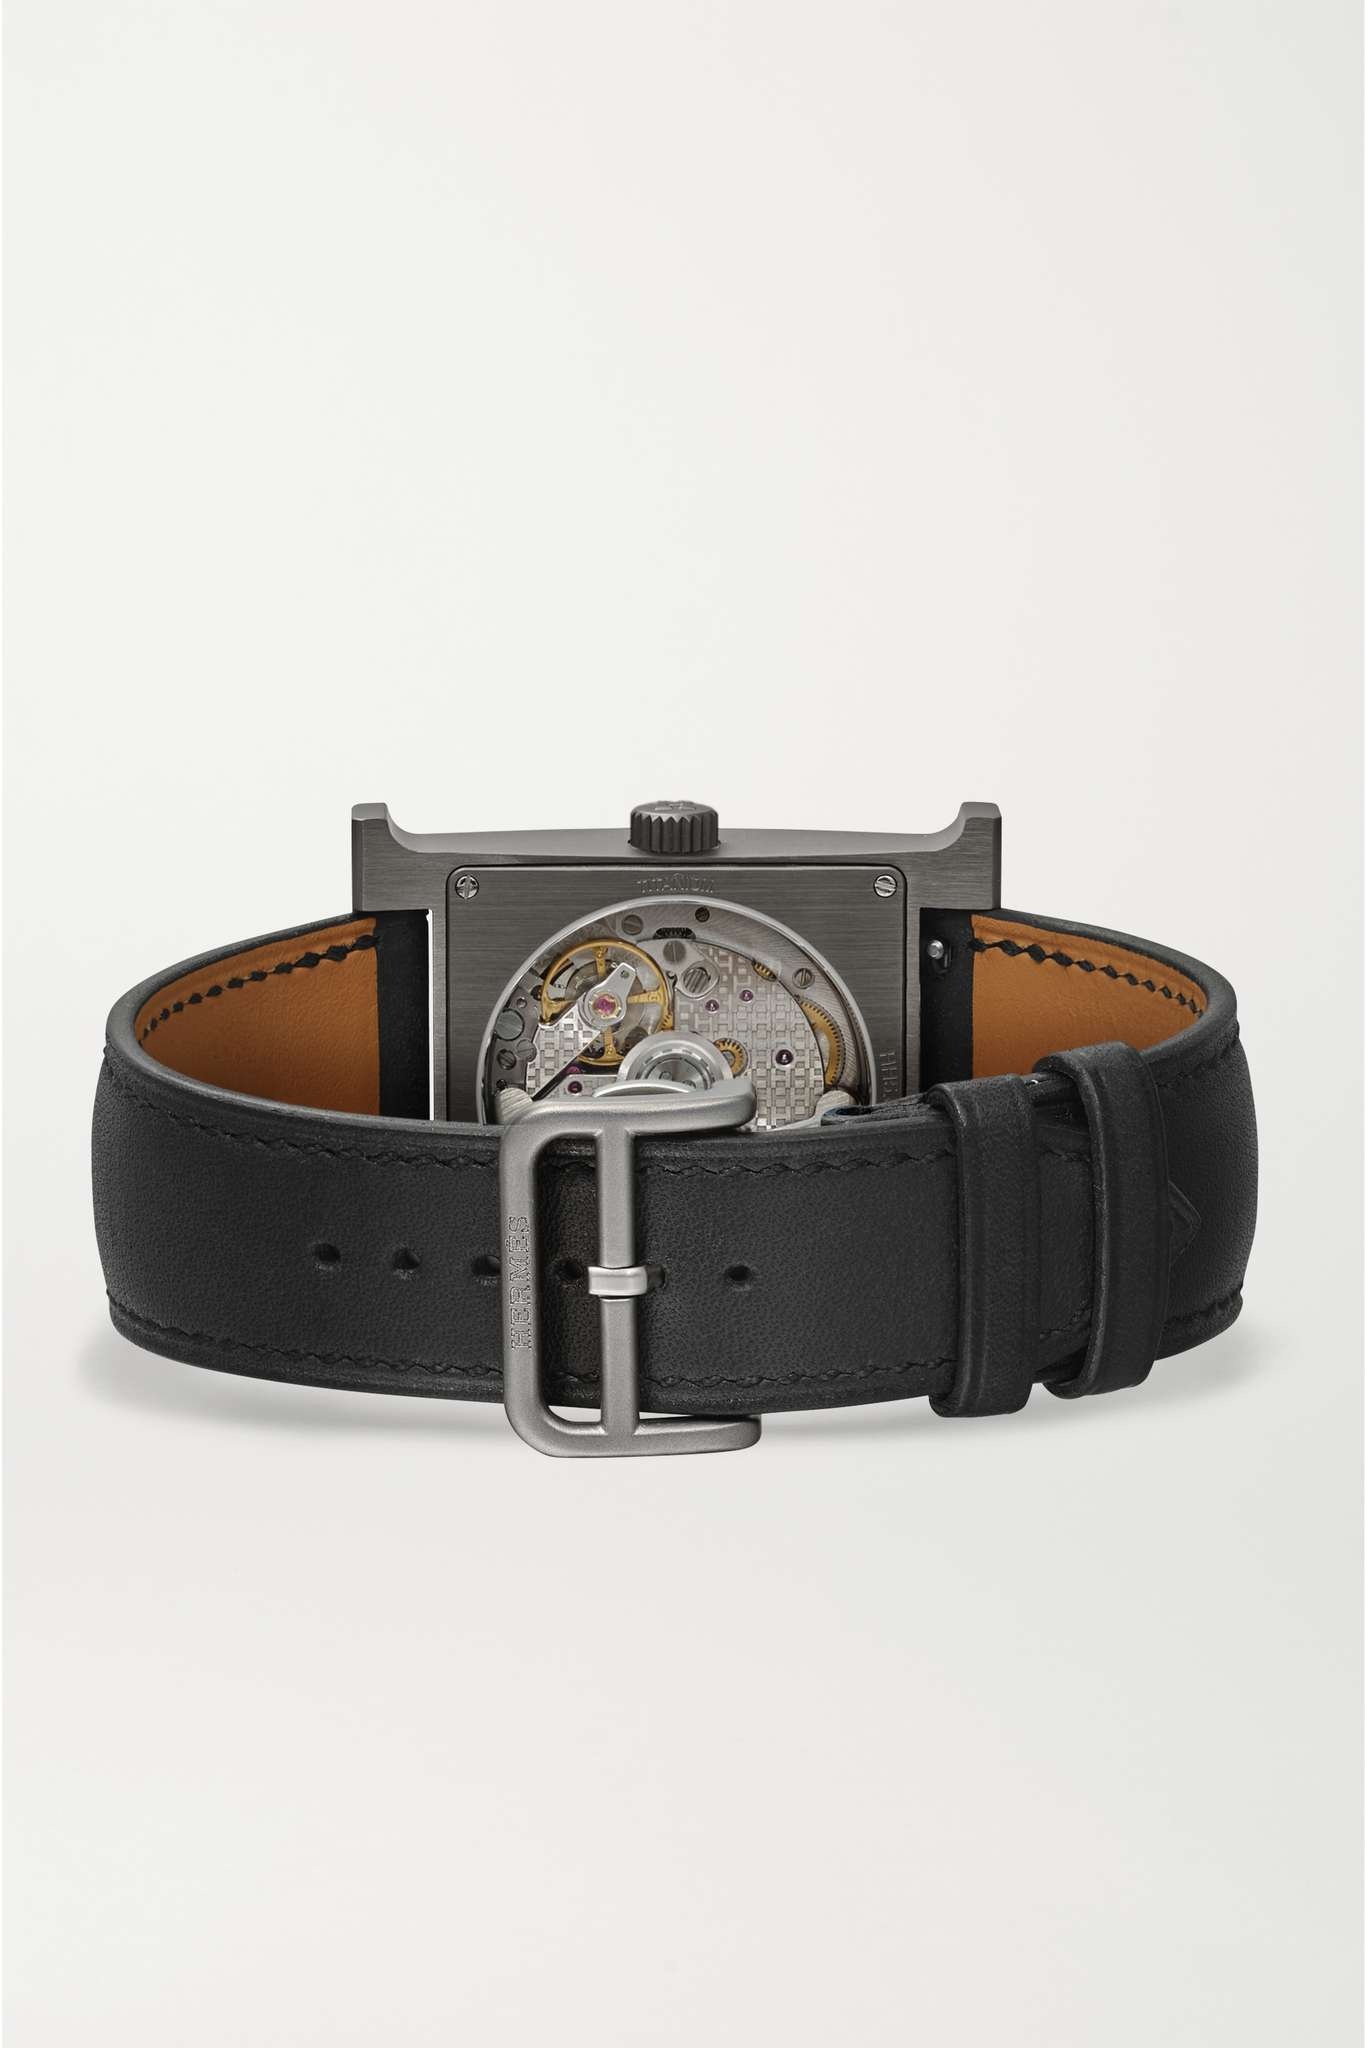 Heure H large Automatic 30.5mm titanium and leather watch - 6